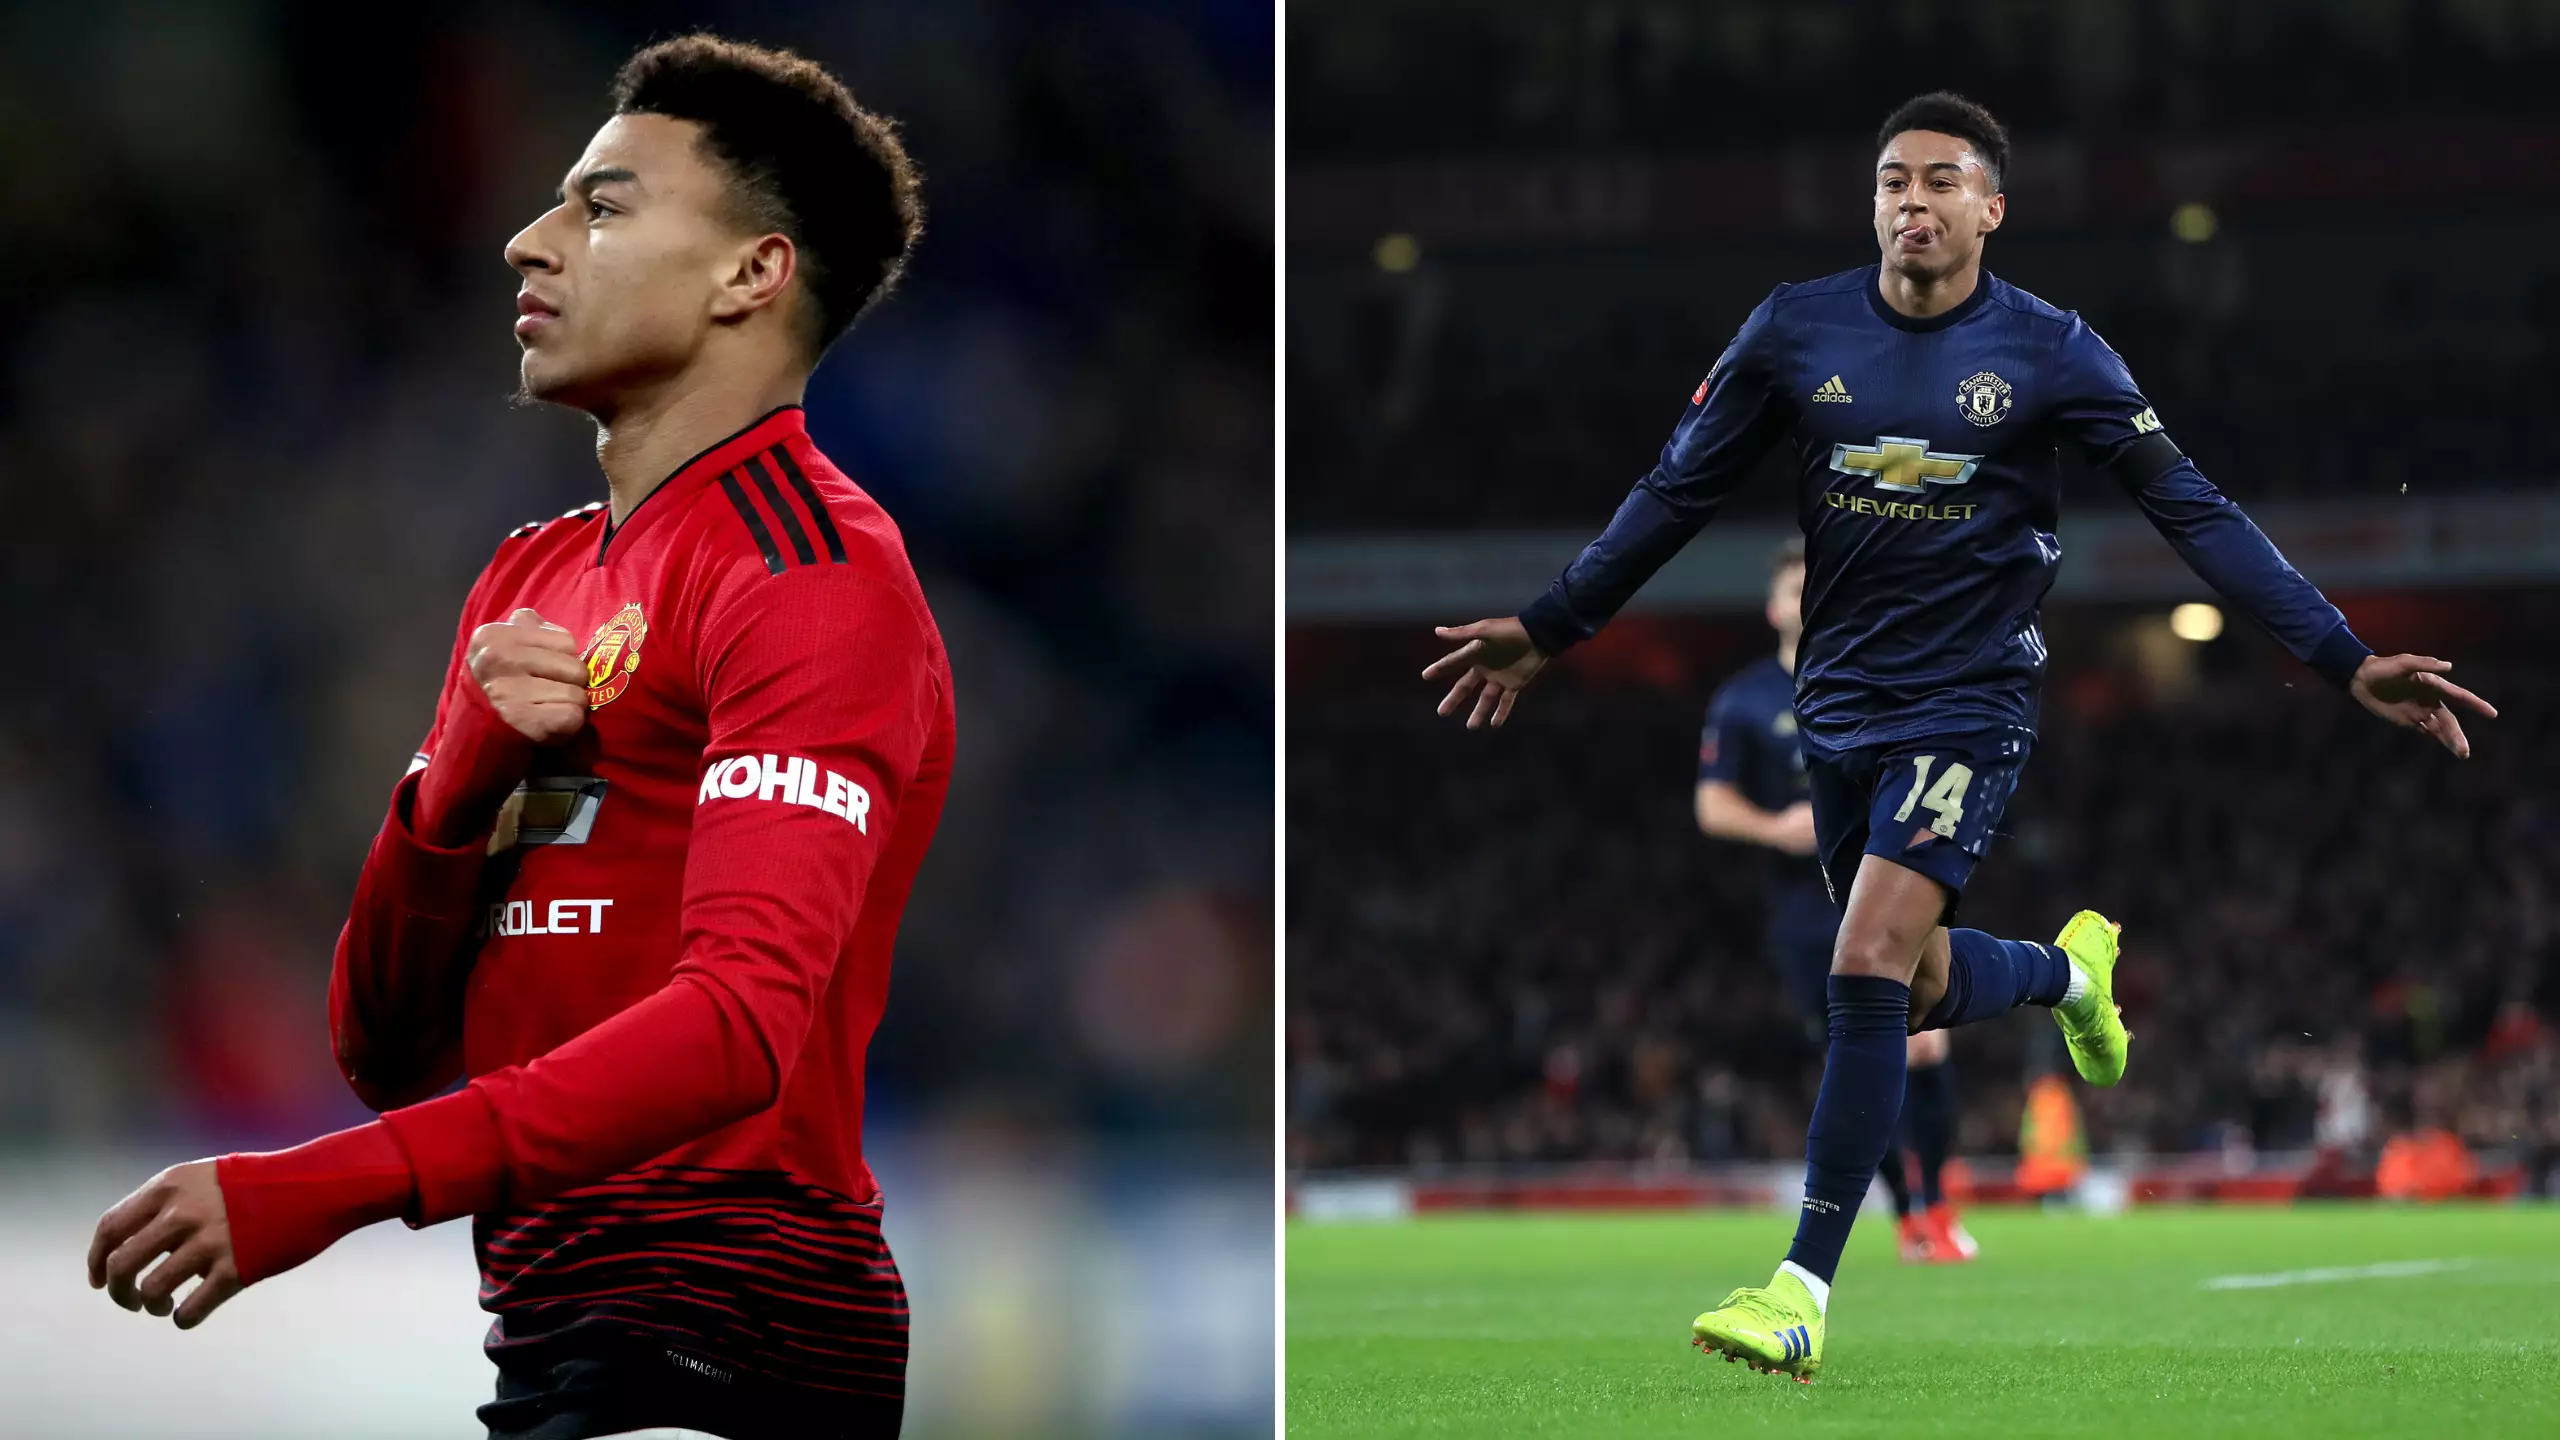 Jesse Lingard To Be Given New £130,000 A Week Deal By Manchester United